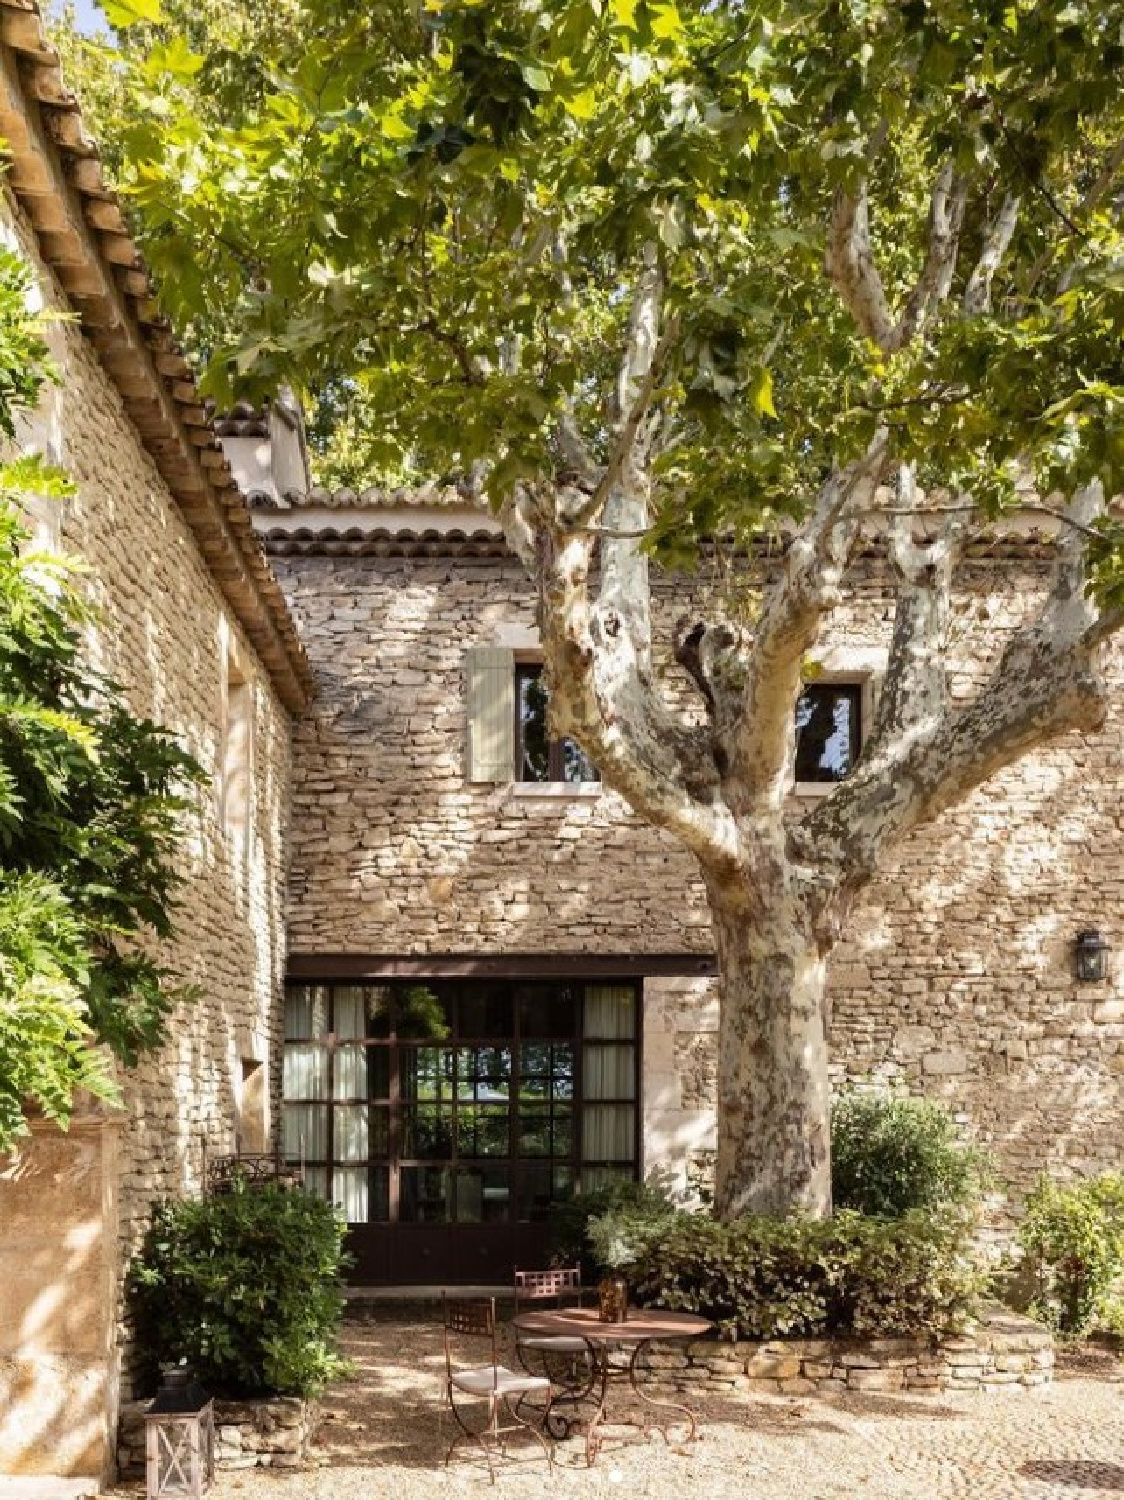 Garden. Warm European luxury and cozy opulence in a French vacation villa in Provence - La Bastide de Laurence. #frenchbastide #frenchvilla #luxuryvilla #provencevilla #warmeuropeanluxury #cozyopulence #provencehomes #francetravel